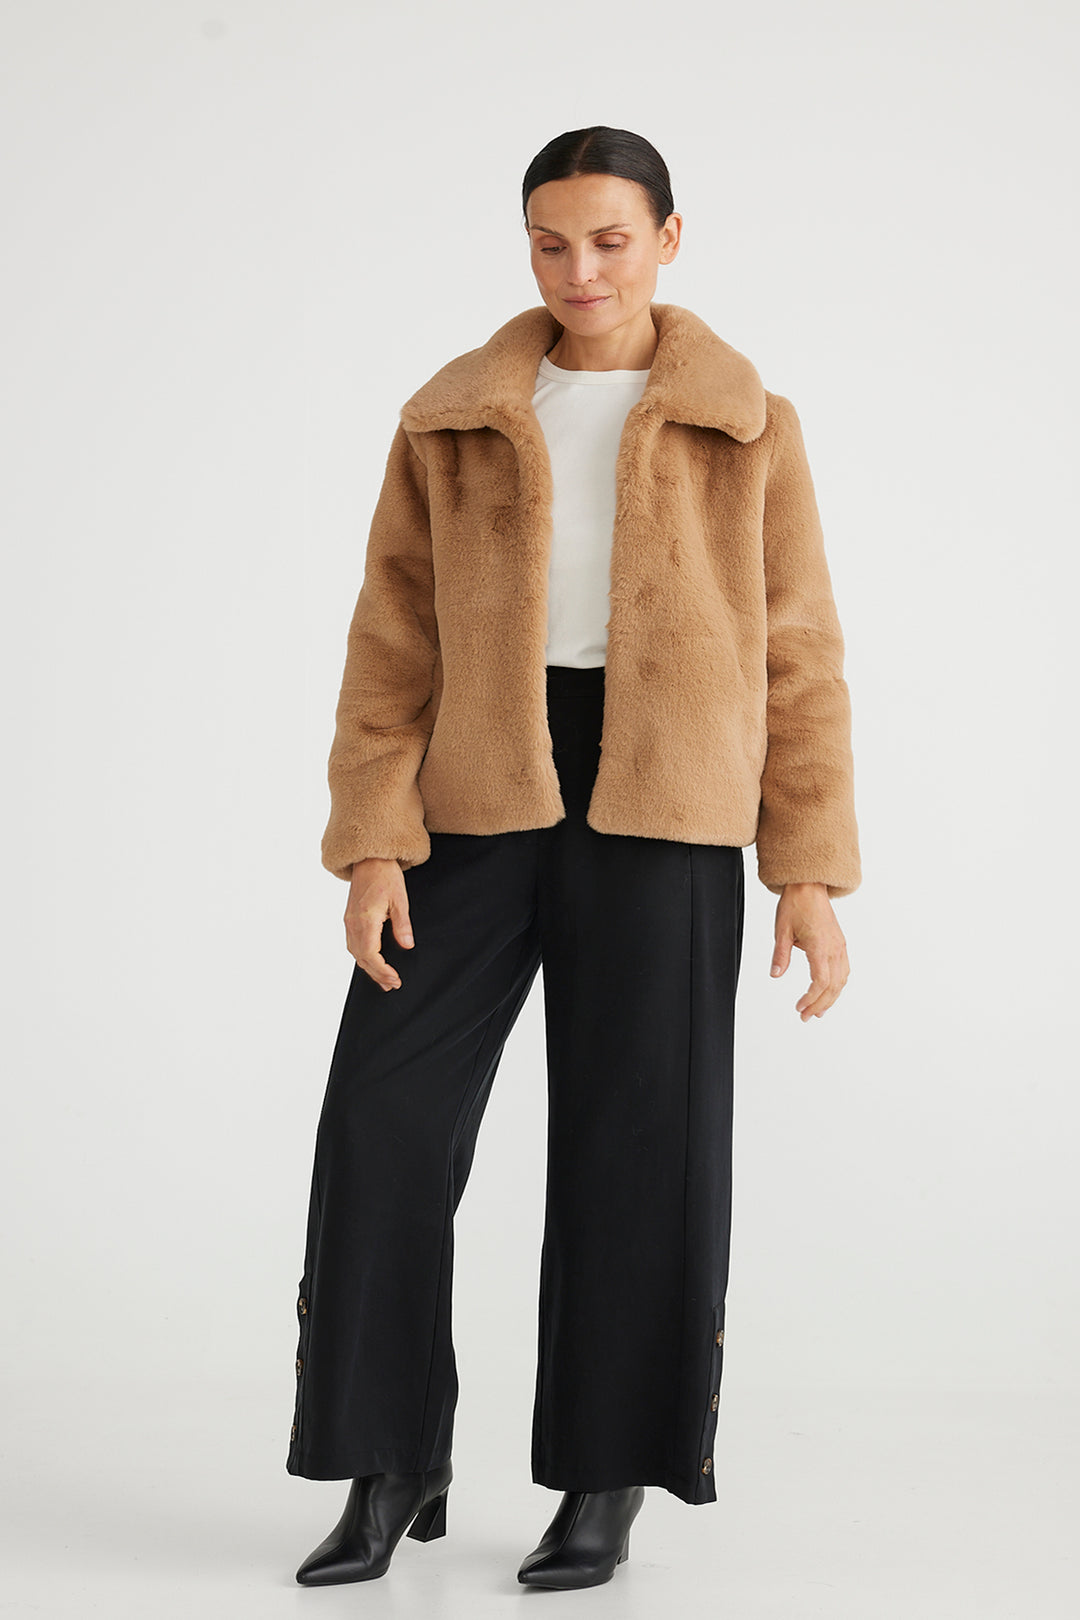 Transport to a wonderland of warmth in the Steinway Jacket, clip metal closure, an oversized collar, this jacket will keep you cozy and on trend all season.   Brand Brave & True  Style BT6765-3 Colour Biscotti ( Beige ) 100% Polyester Hip Length collared Jacket Faux Fur Fully Lined  Side Pockets 